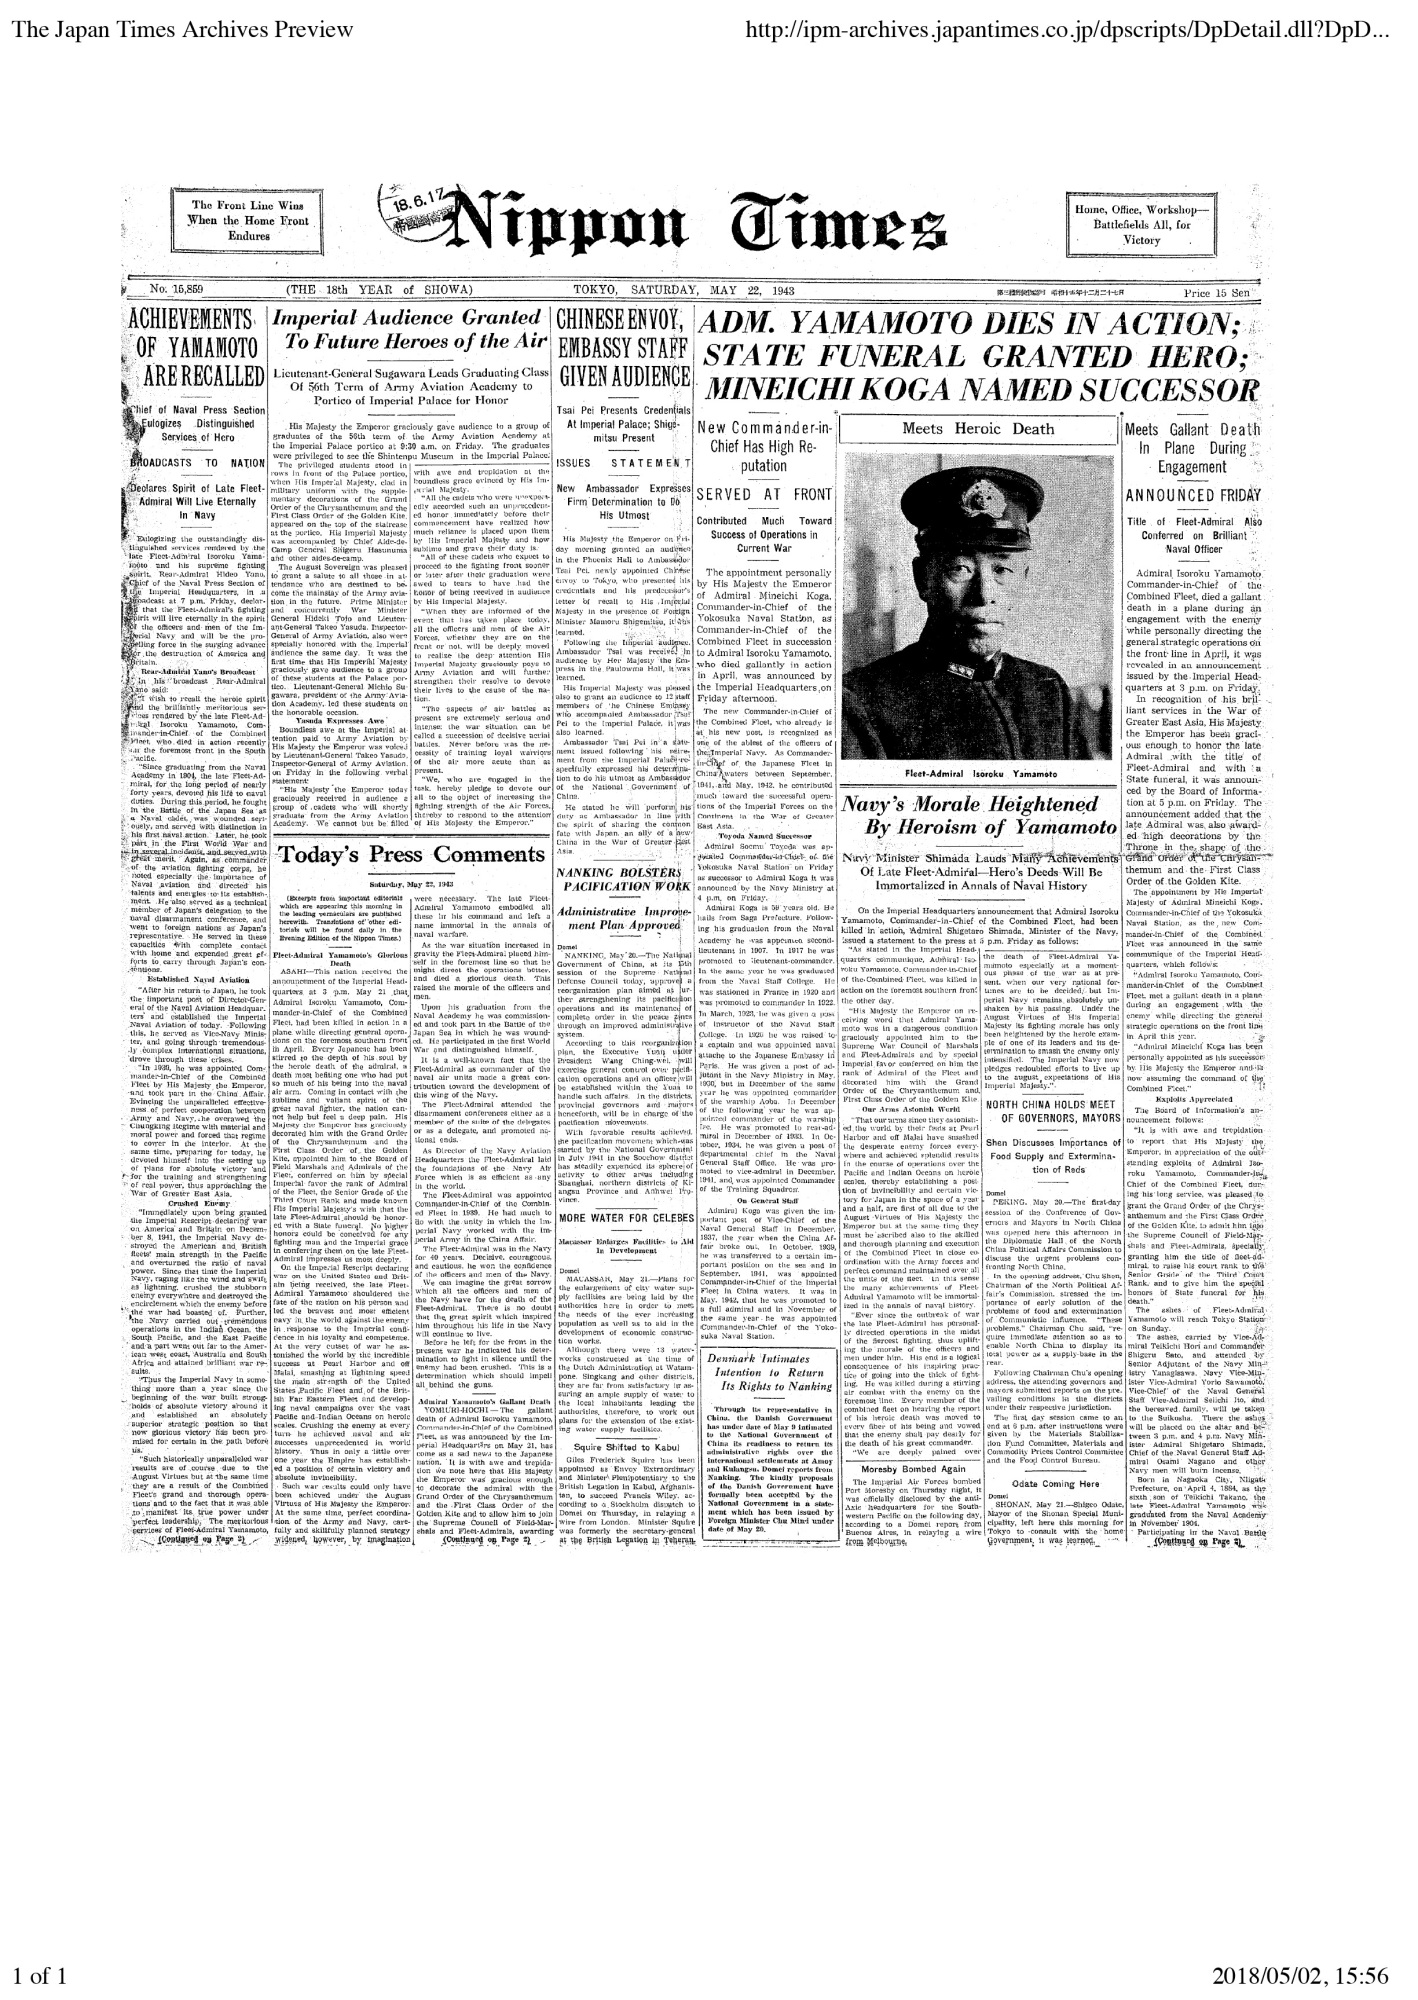 Japan 1943: 'Admiral Isoroku Yamamoto dies a gallant death in action' - The  Japan Times